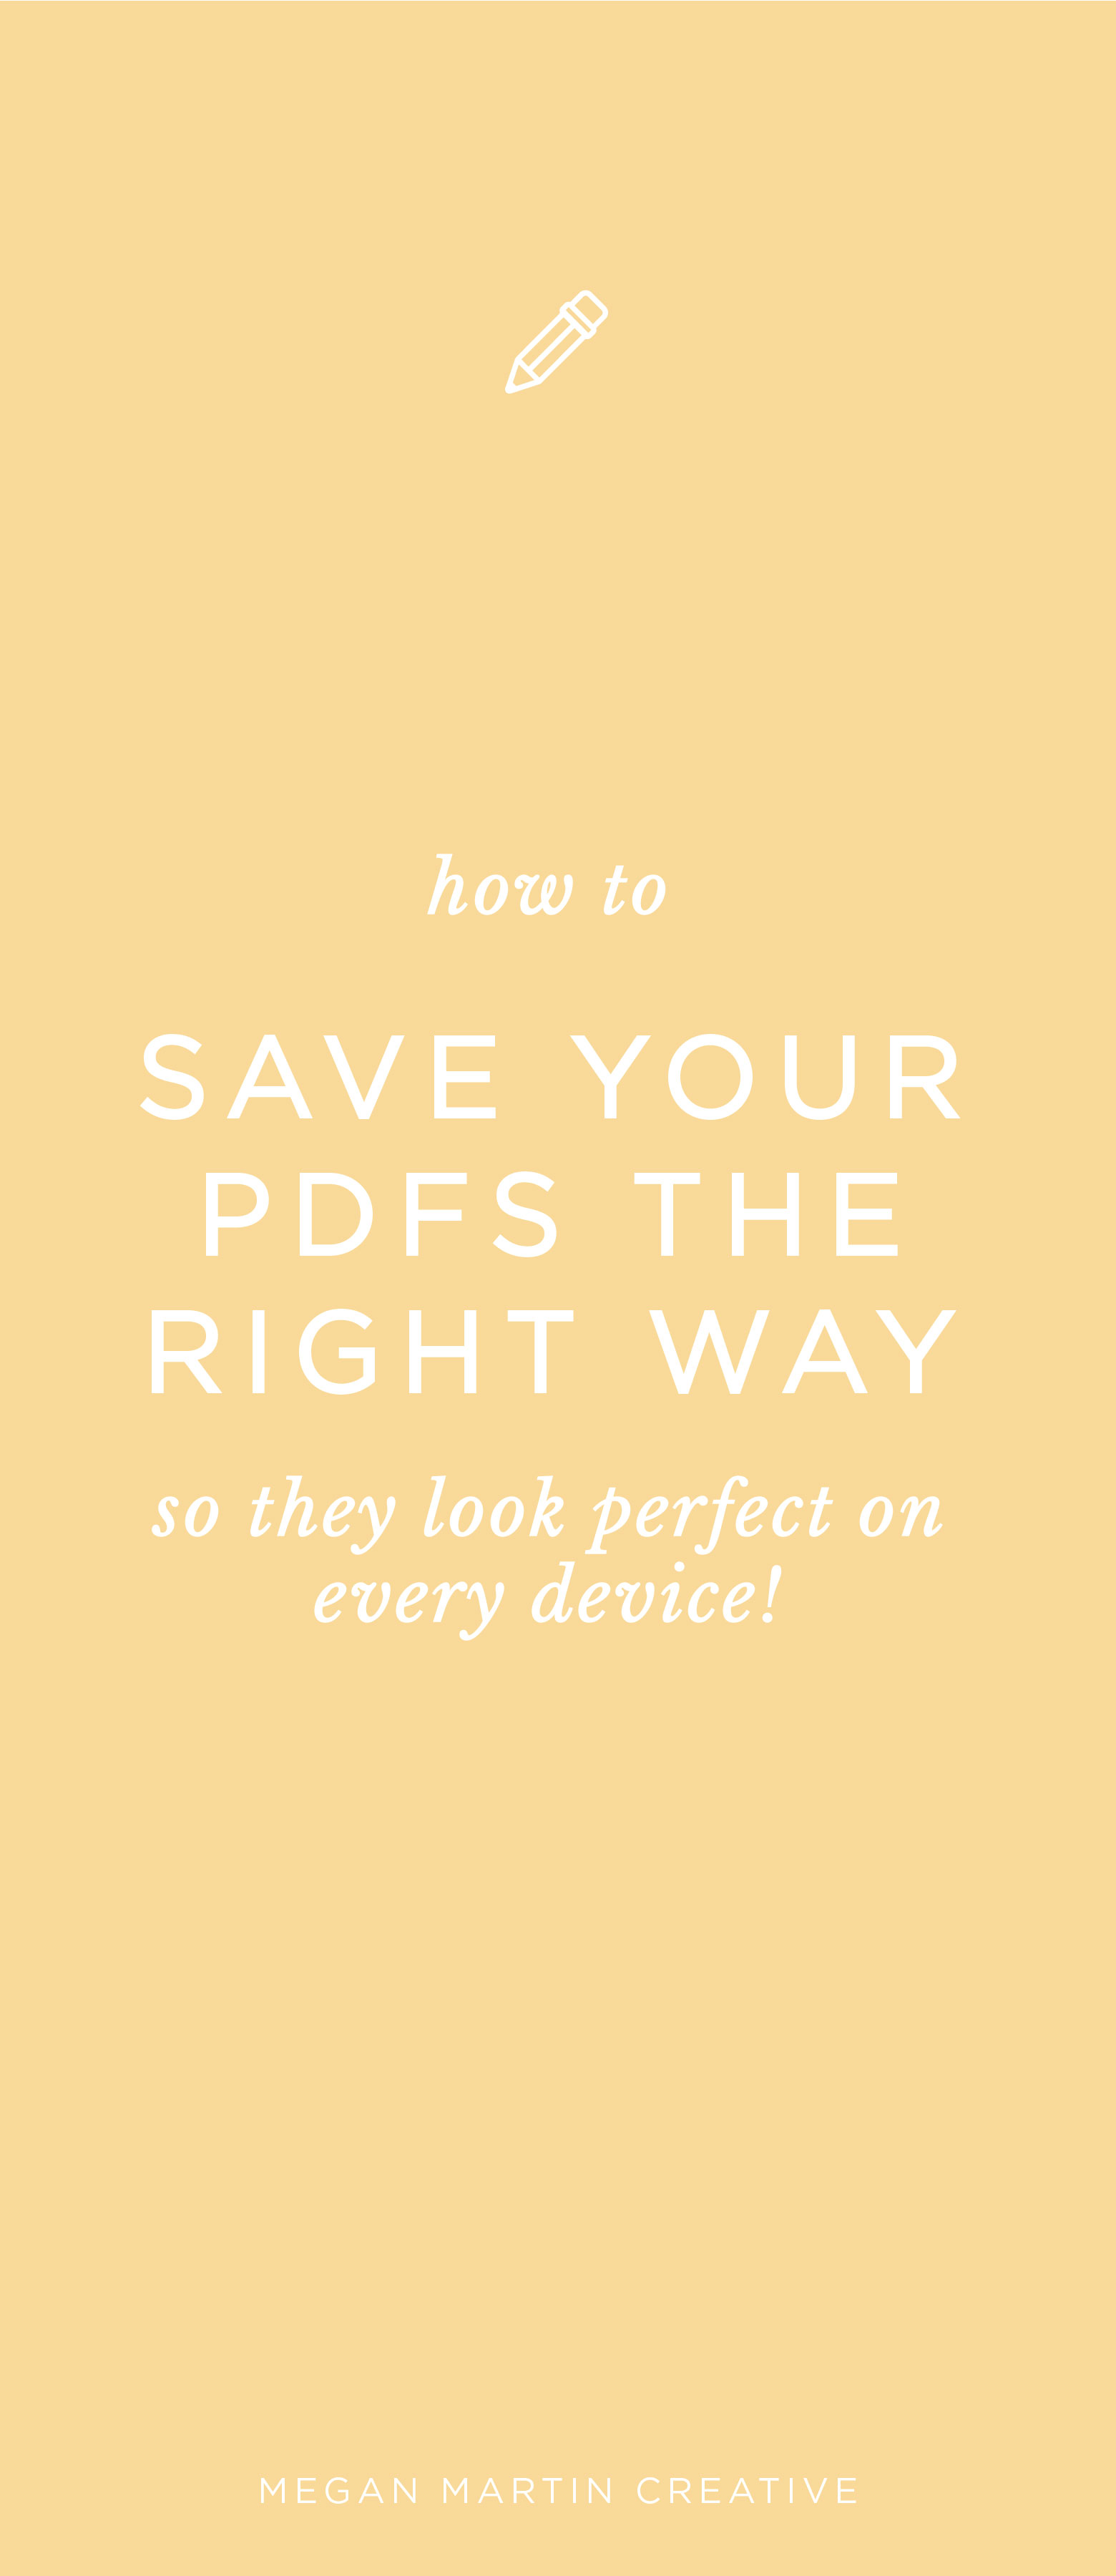 How to save your PDF for perfect viewing across every device, pdf for apple iphone, brand, branding, brand design, creative entrepreneur, Megan Martin Creative